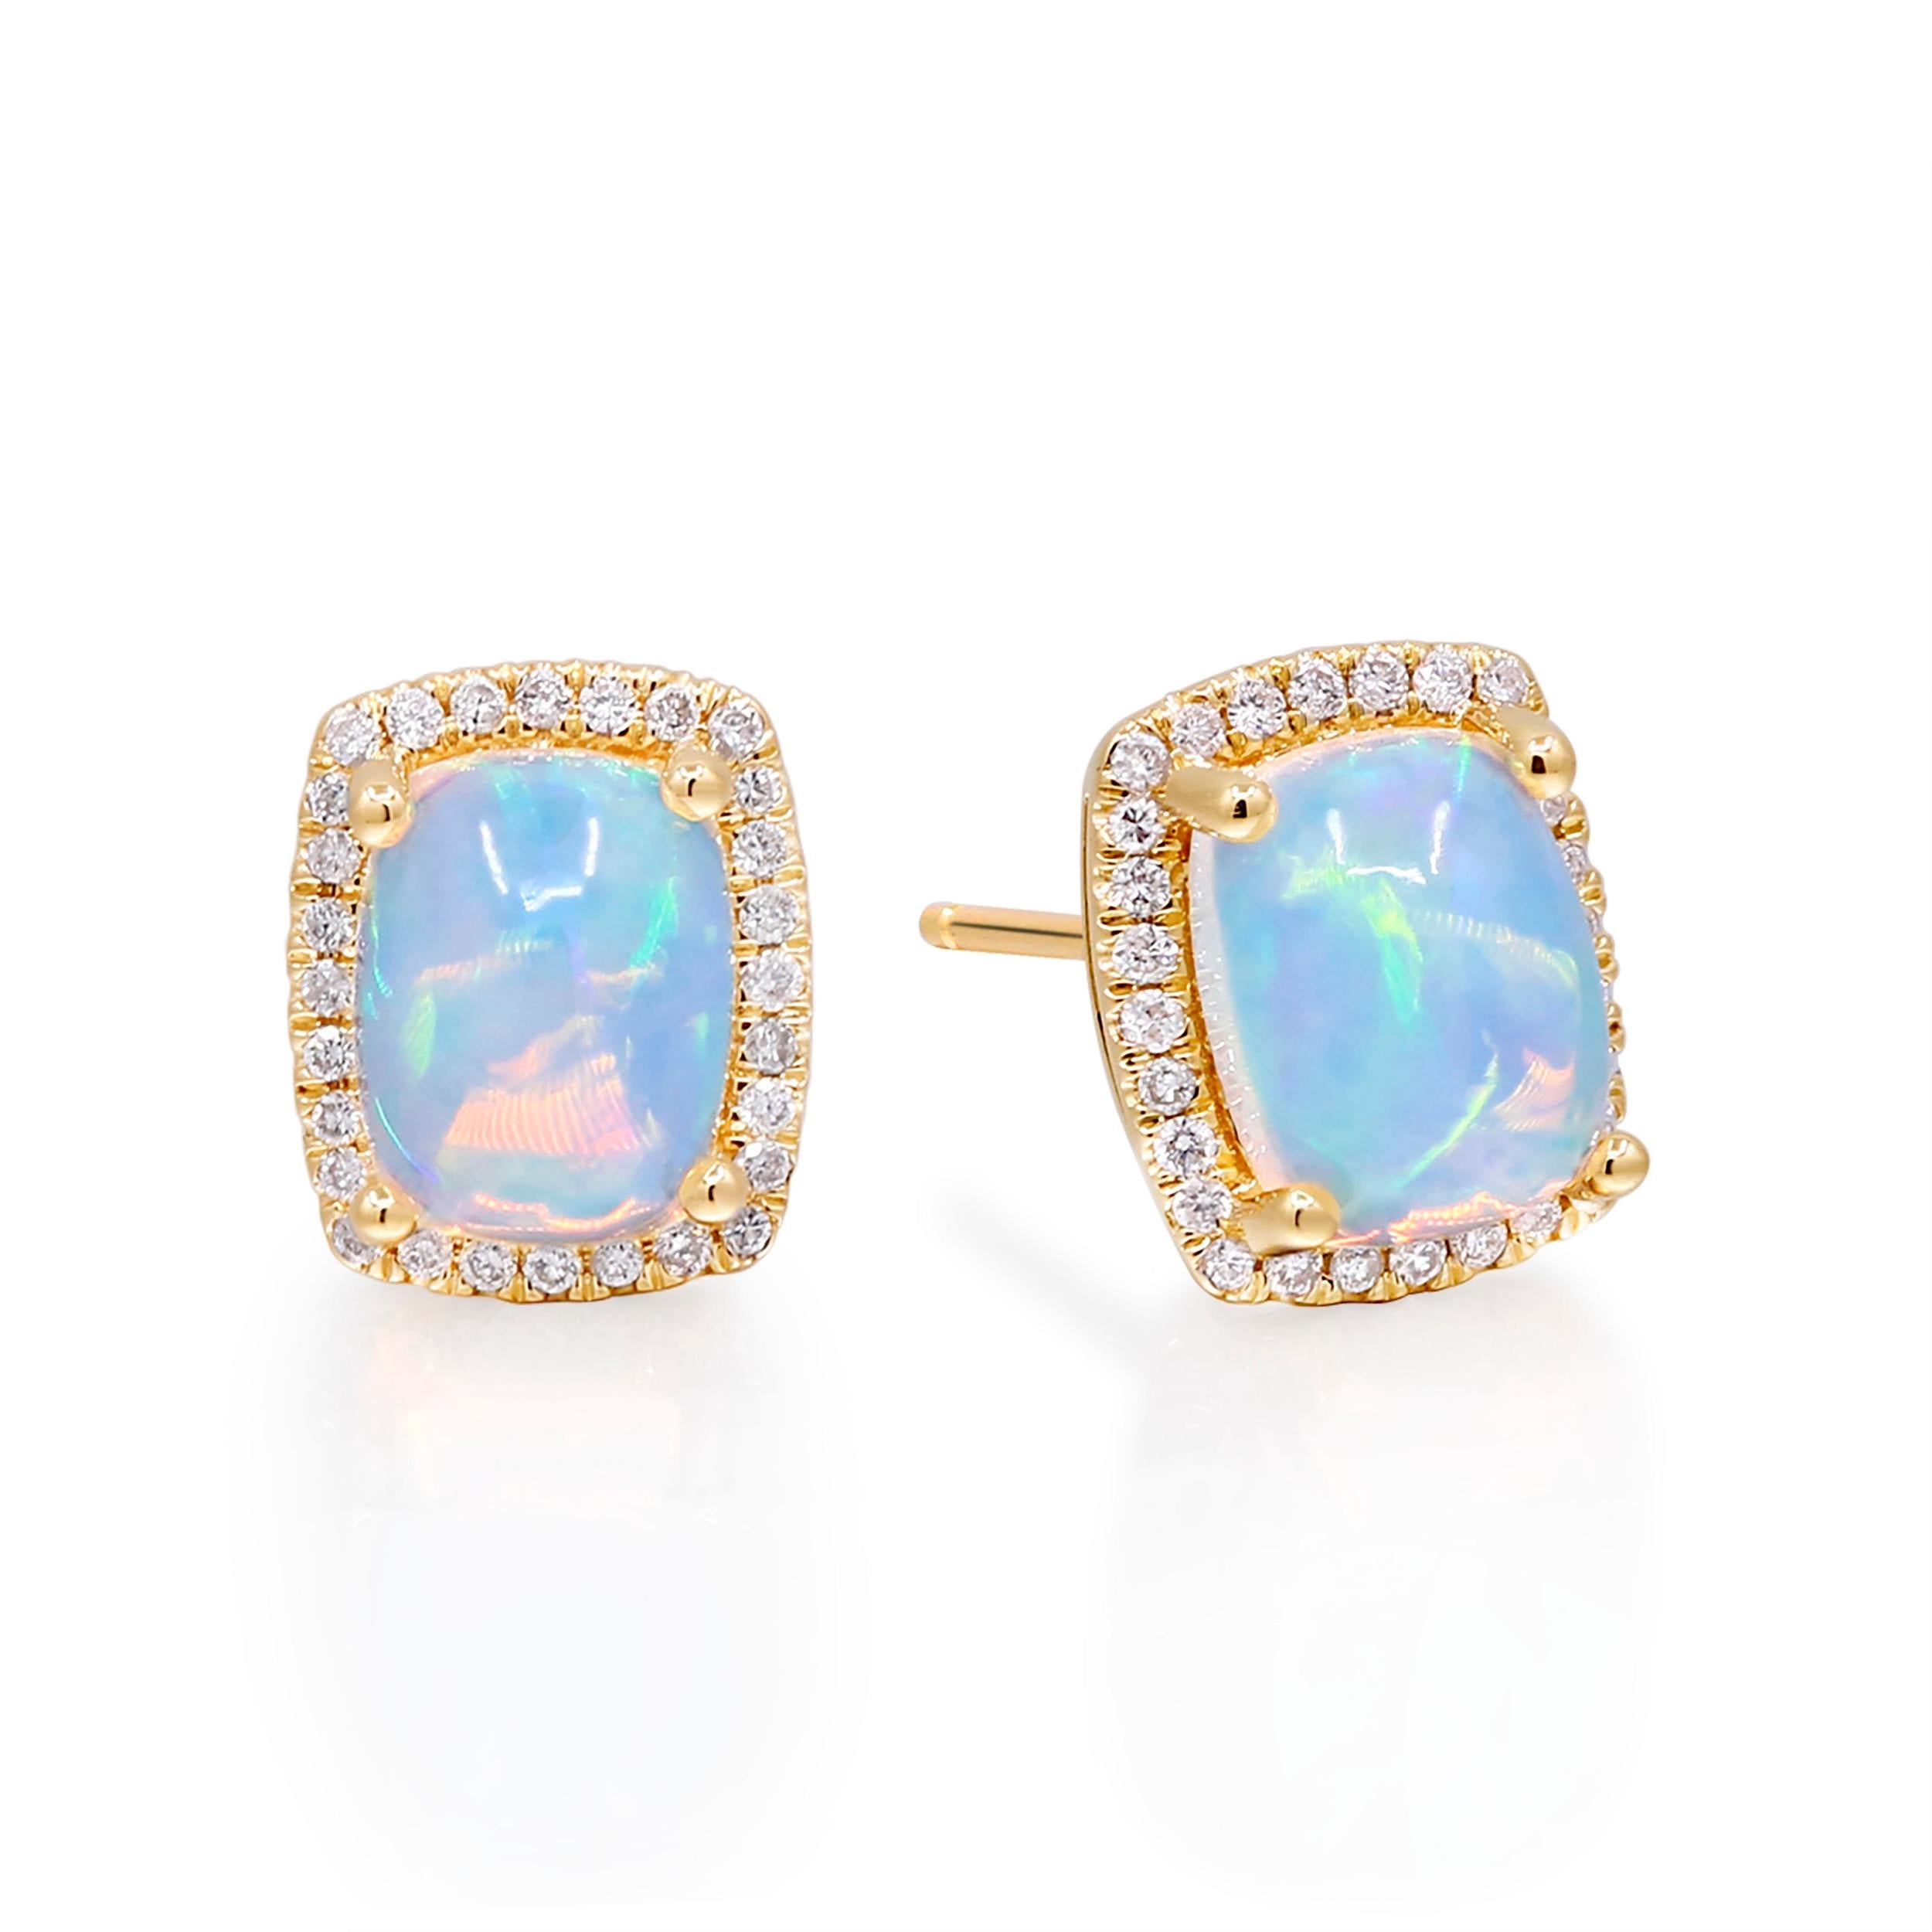 Decorate yourself in elegance with this Earring is crafted from 14-karat Yellow Gold by Gin & Grace Earring. This Earring is made up of 8x6 mm Cushion- Cab (2pcs) 2.10 carat Ethiopian Opal and Round-cut White Diamond (56 Pcs) 0.15 Carat. This